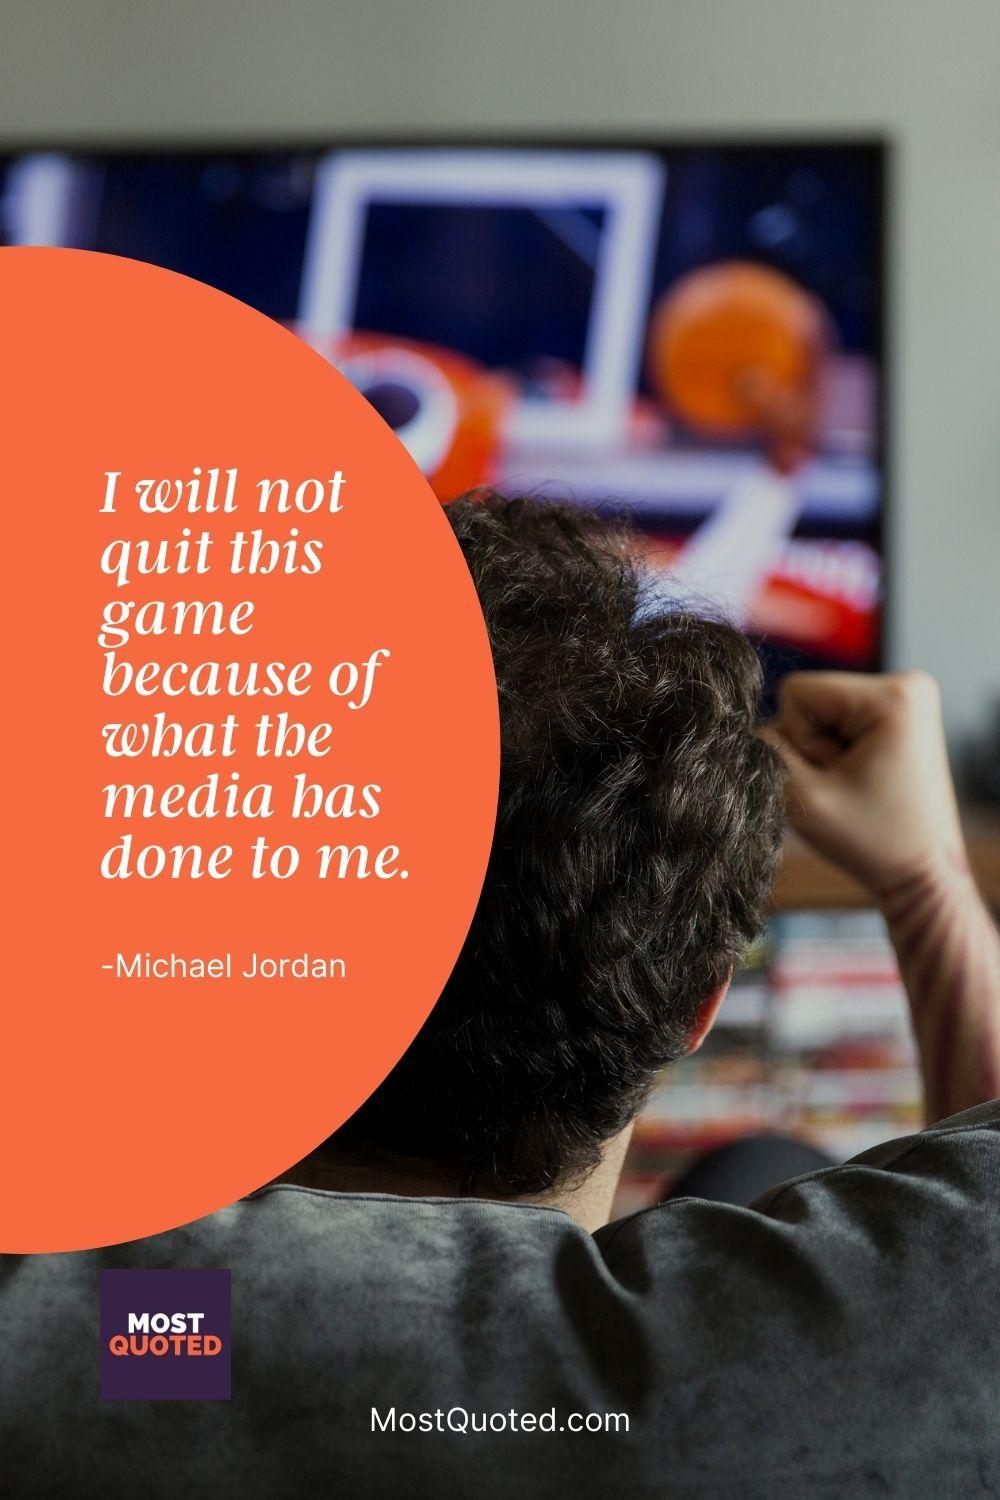 I will not quit this game because of what the media has done to me. - Michael Jordan